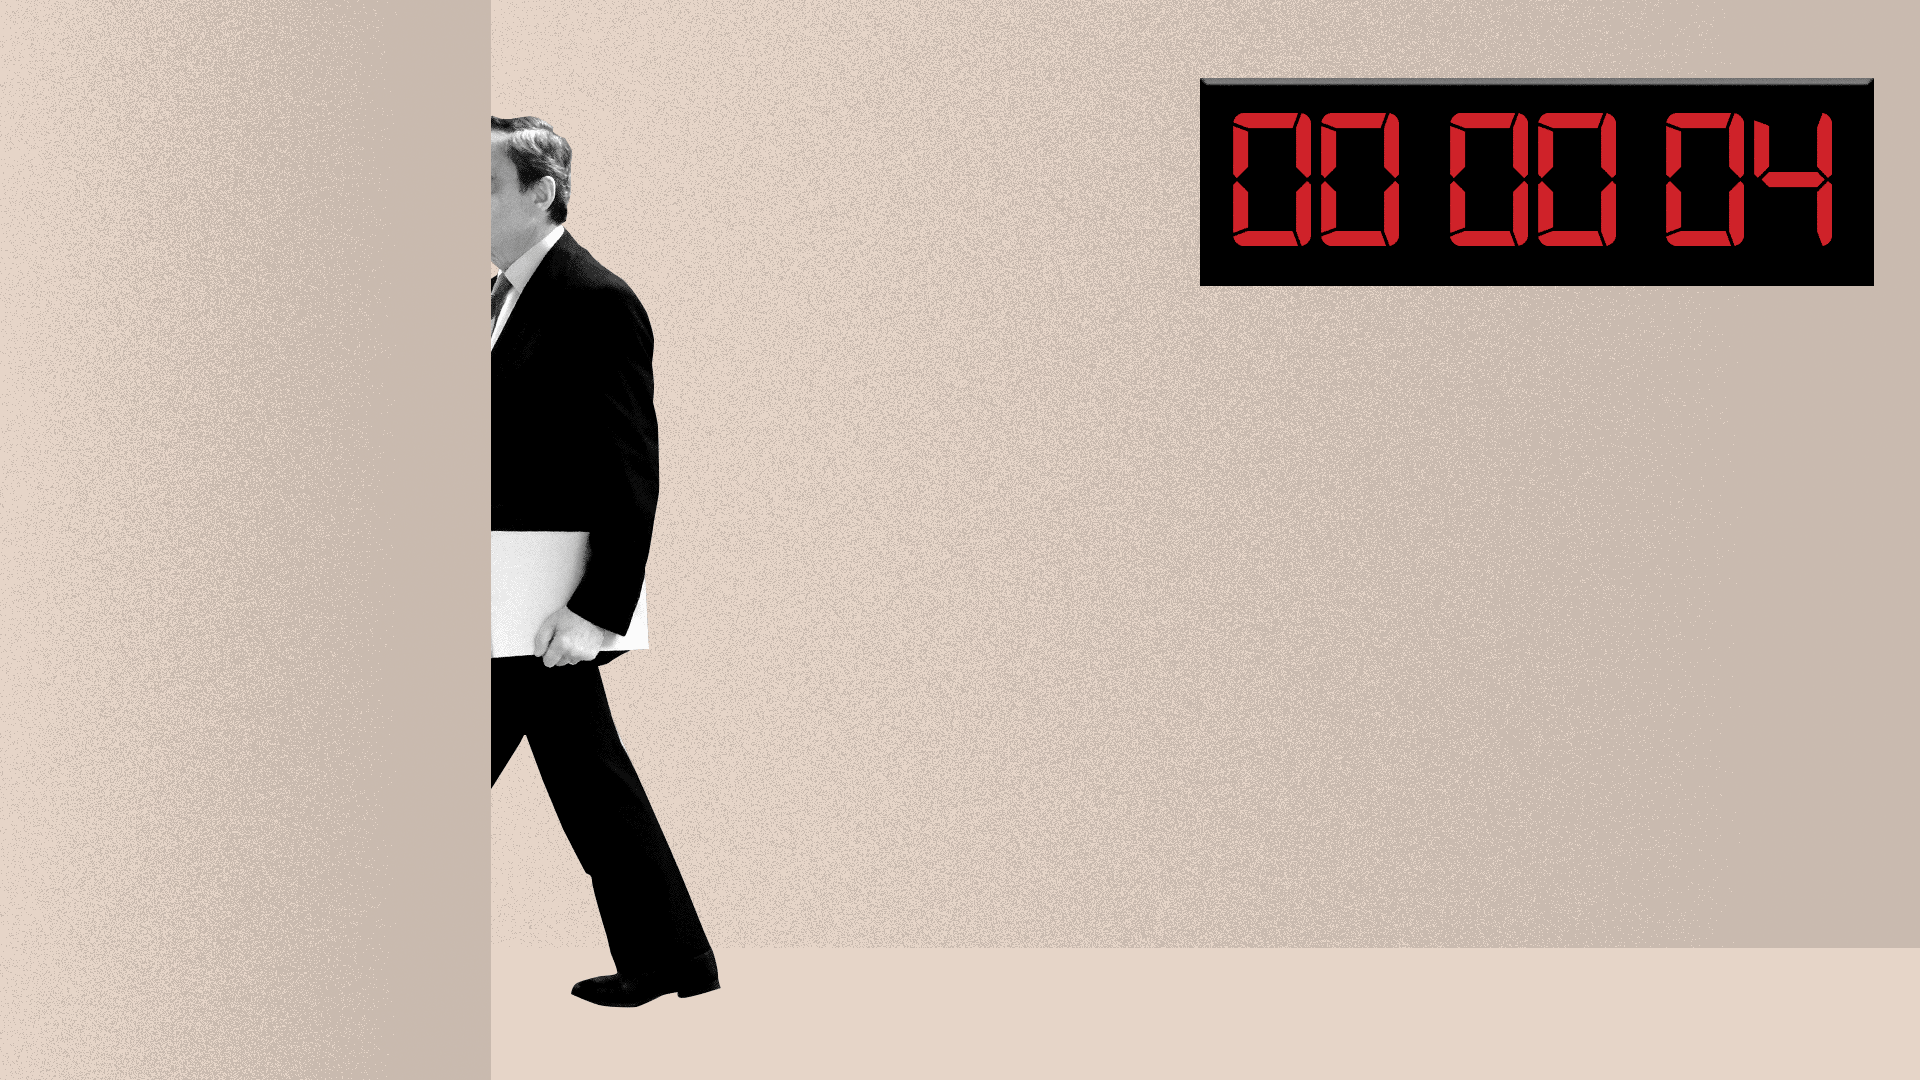 Illustration of Mario Draghi leaving a room with a countdown clock flashing 00:00:00.